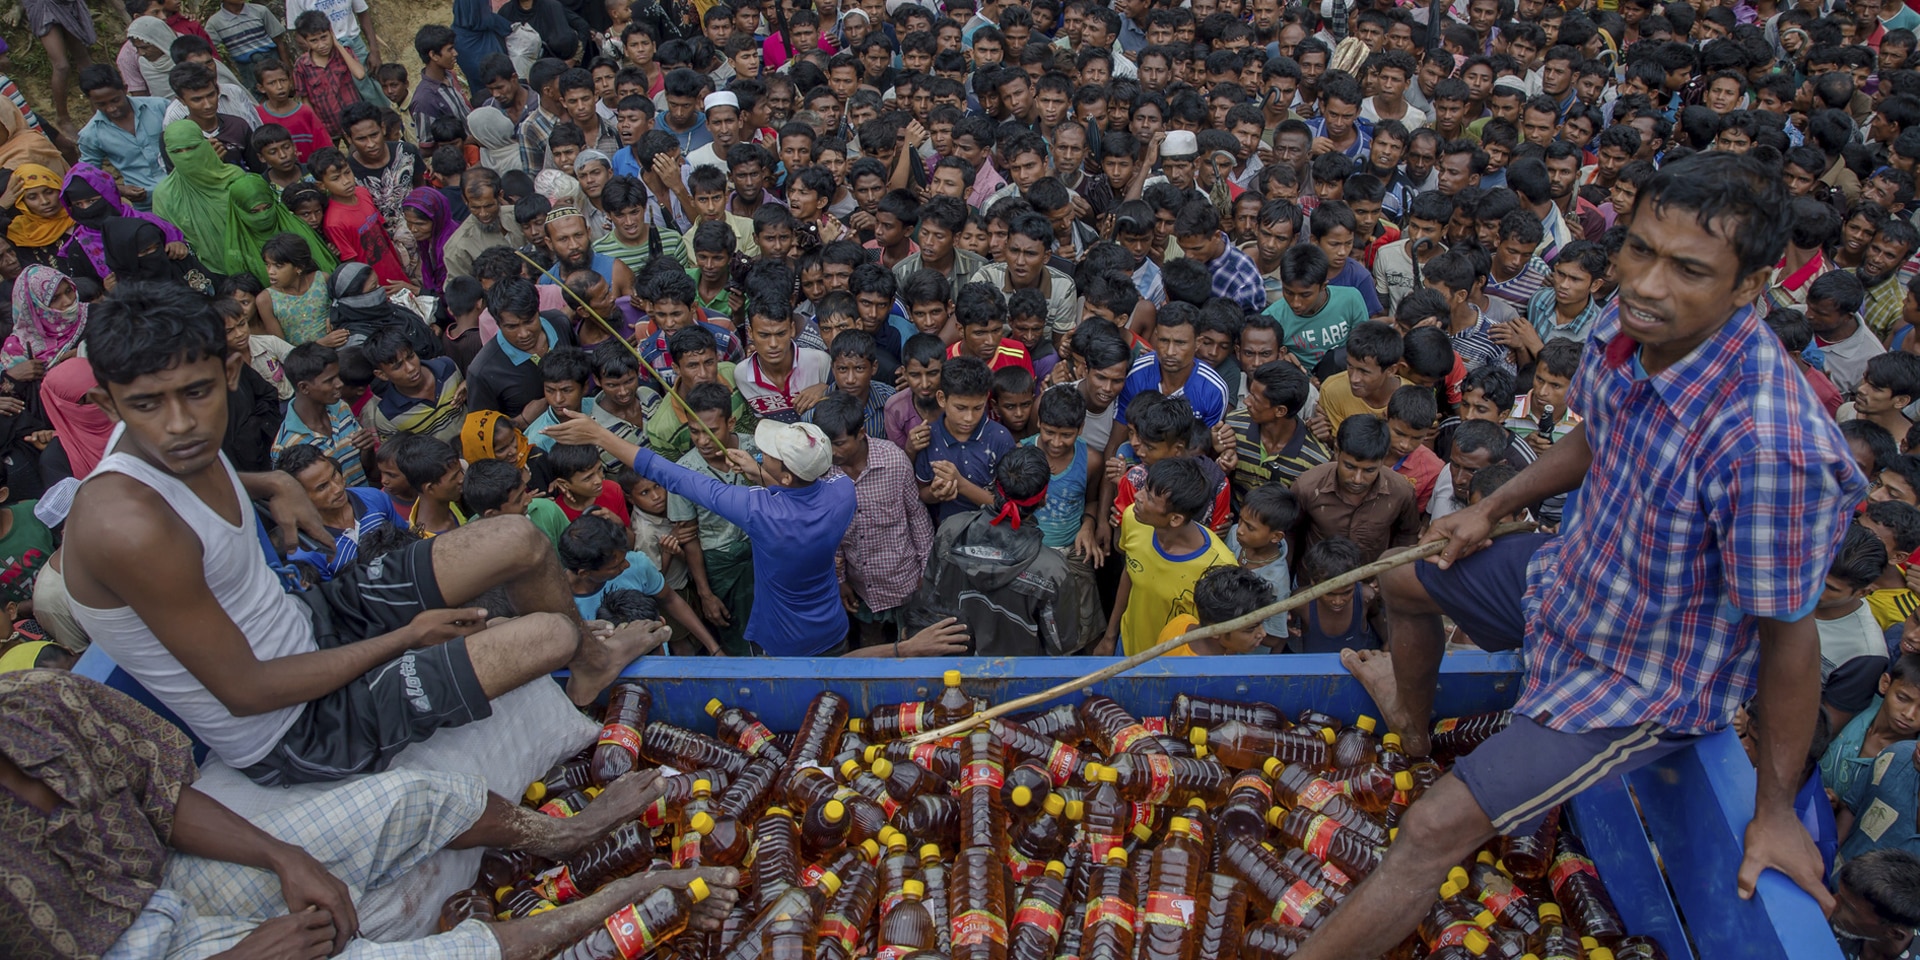  A densely packed crowd waits for drinks to be distributed in the Kutupalong-Balukhali refugee camp in Bangladesh.